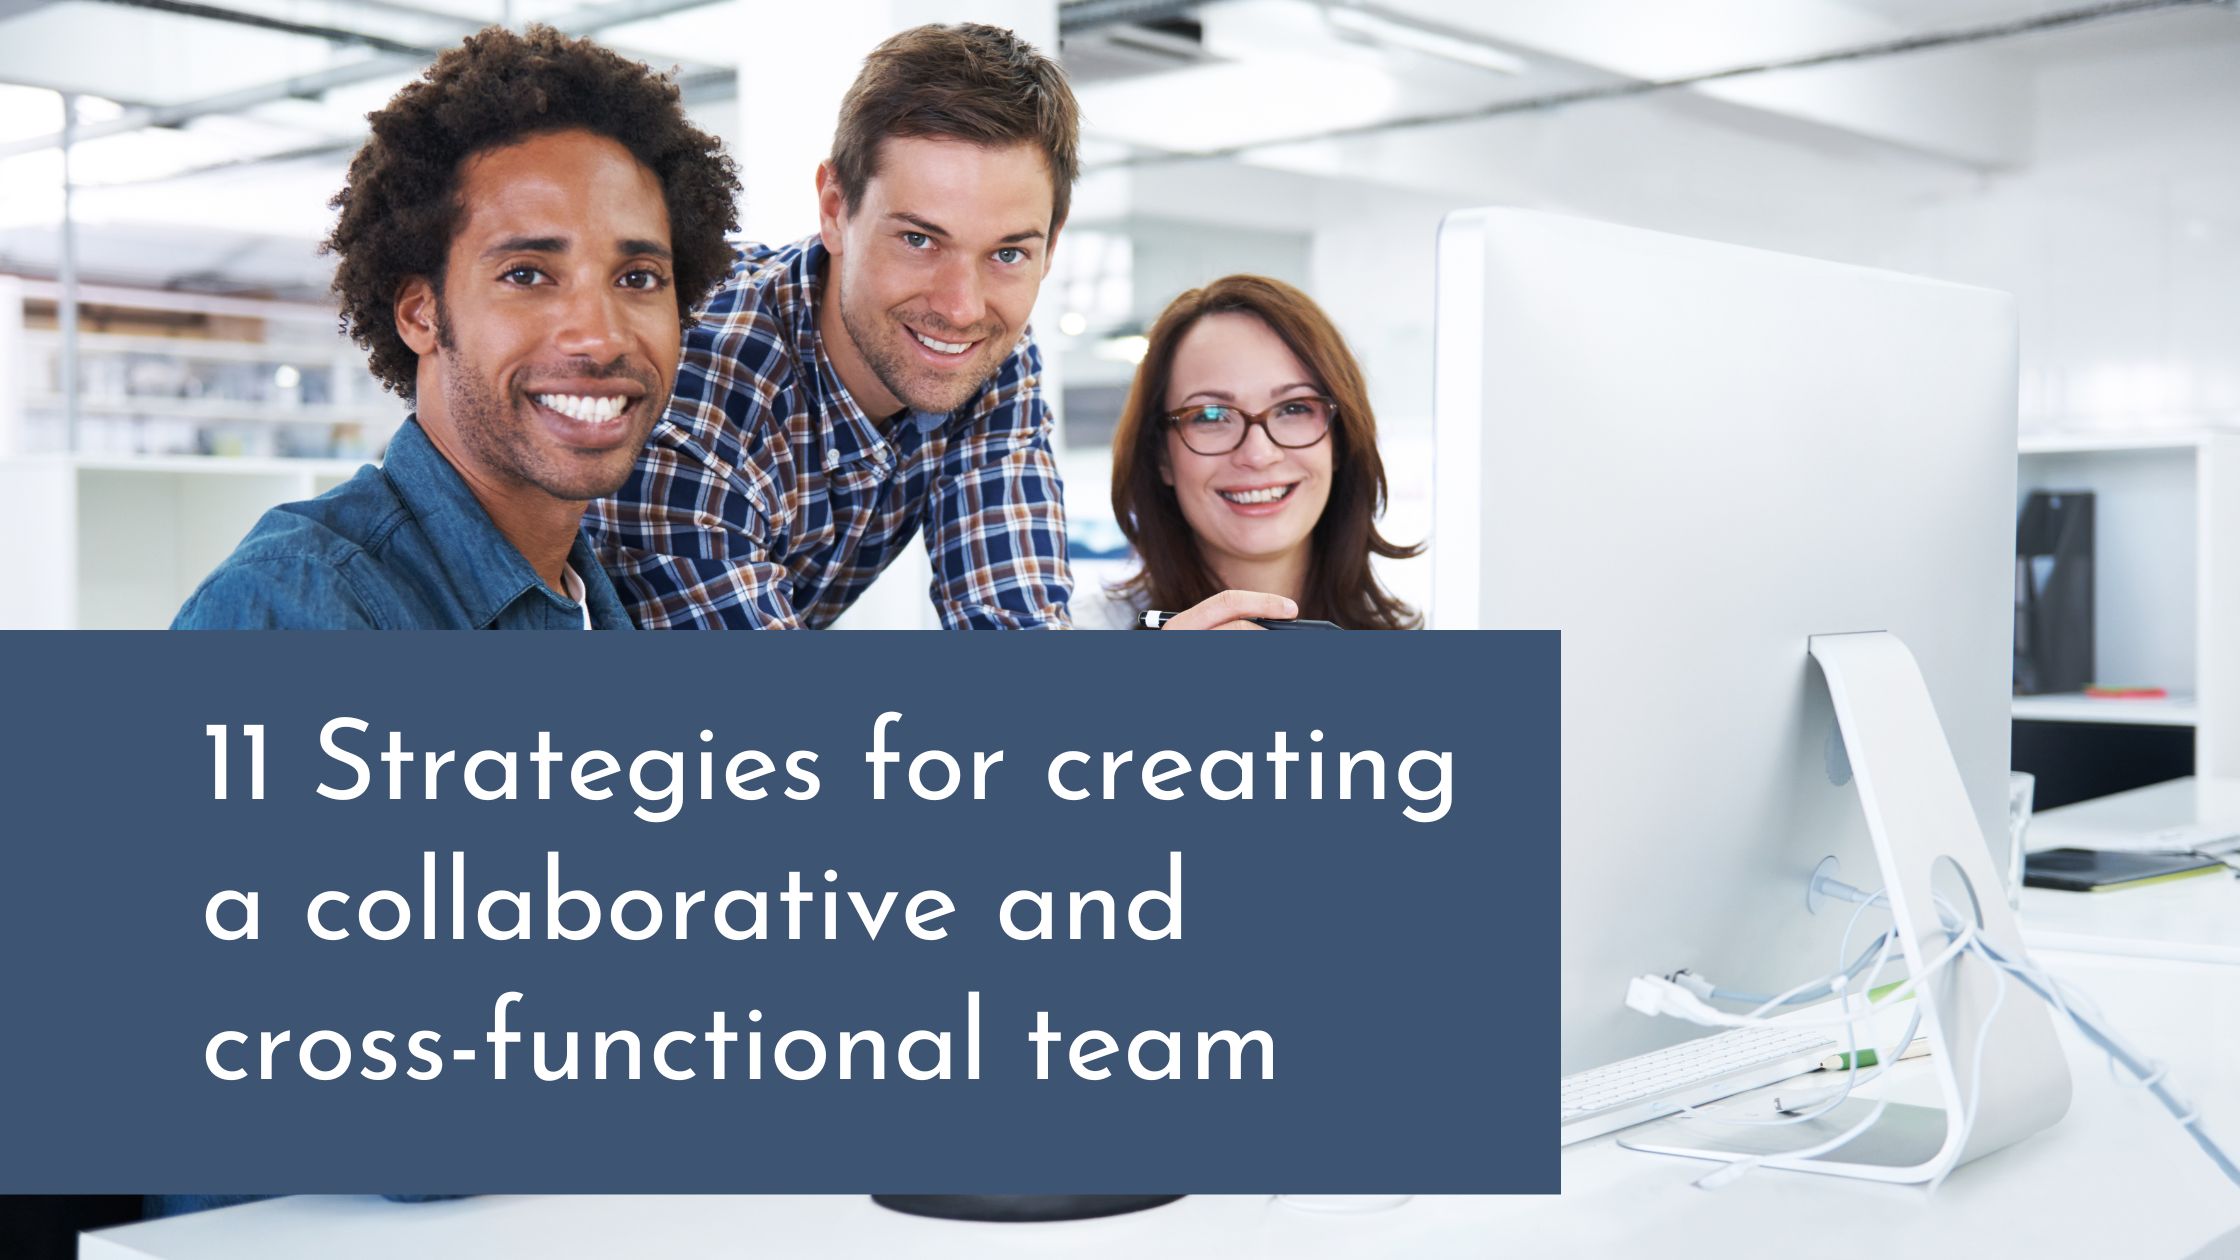 Strategies for creating a collaborative and cross-functional team